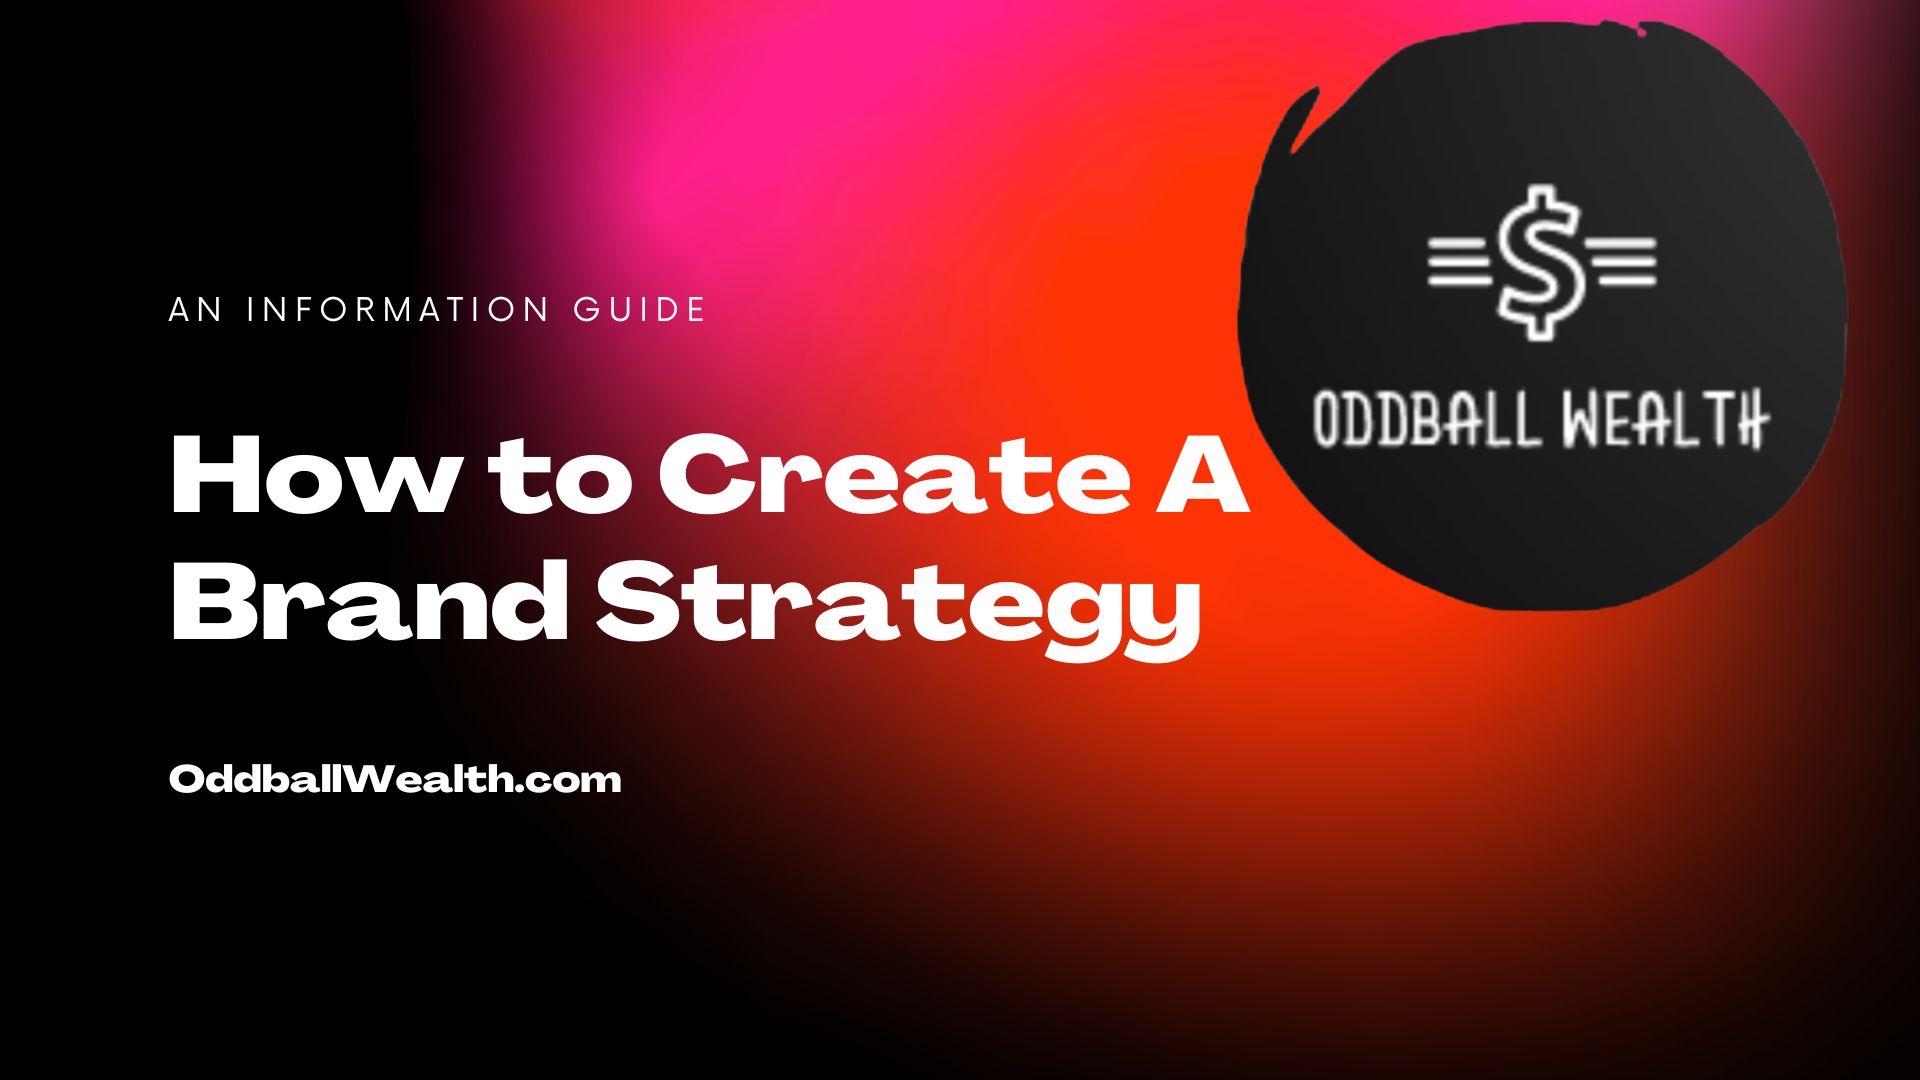 How to Create a Brand Strategy Oddball Wealth Blog Post